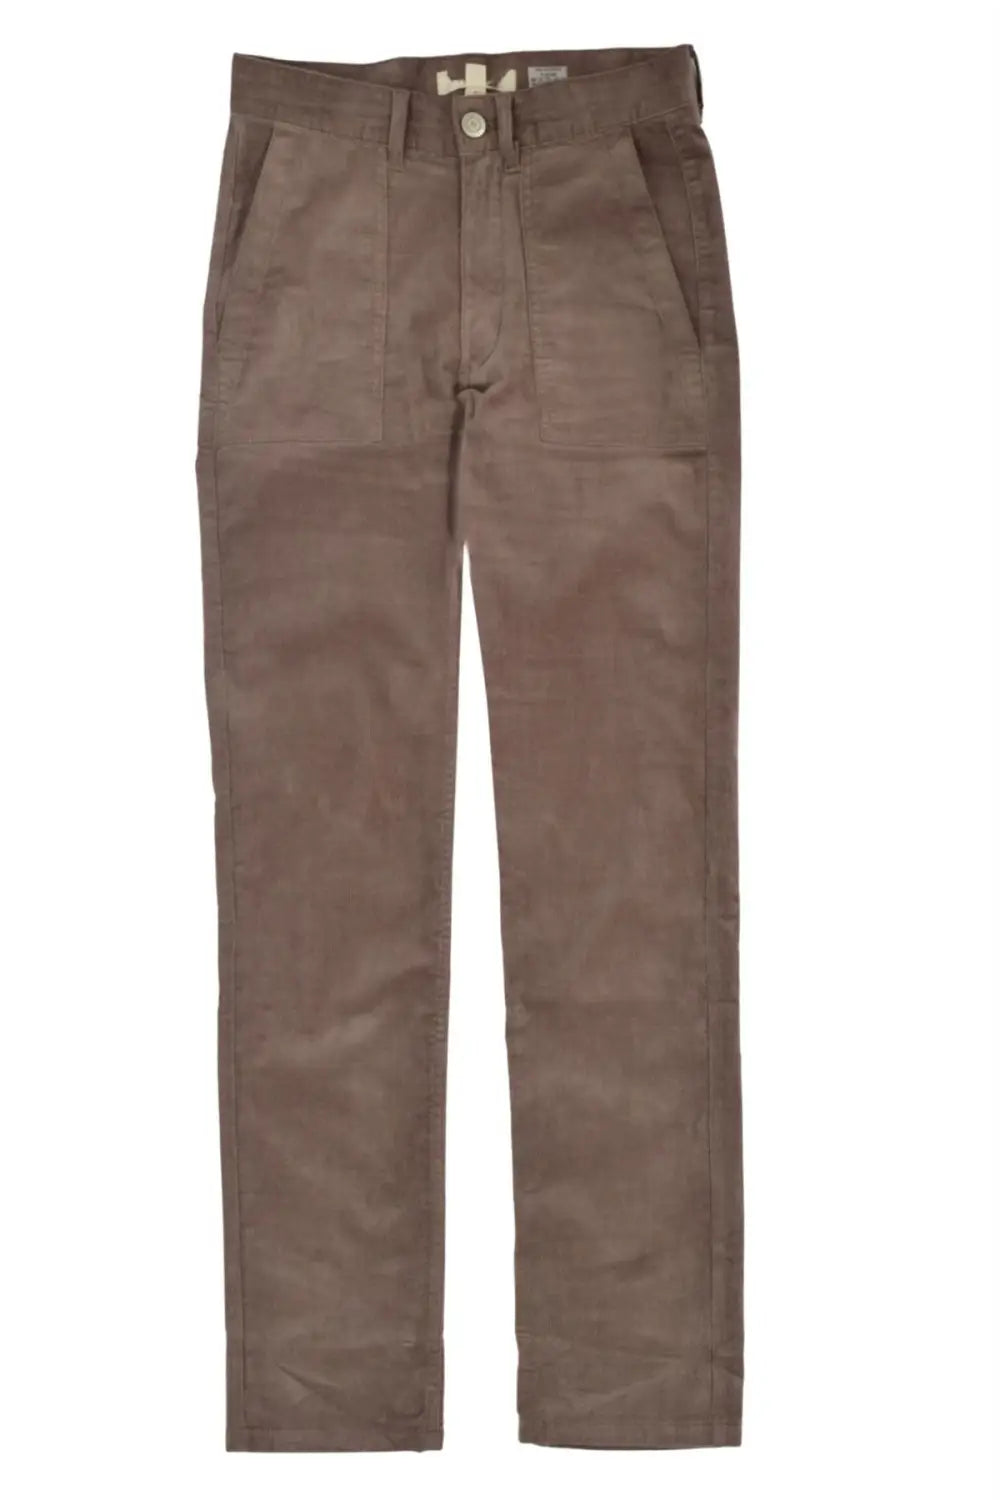 M&S Per Una Needlecord Cropped 3/4 Length Trousers